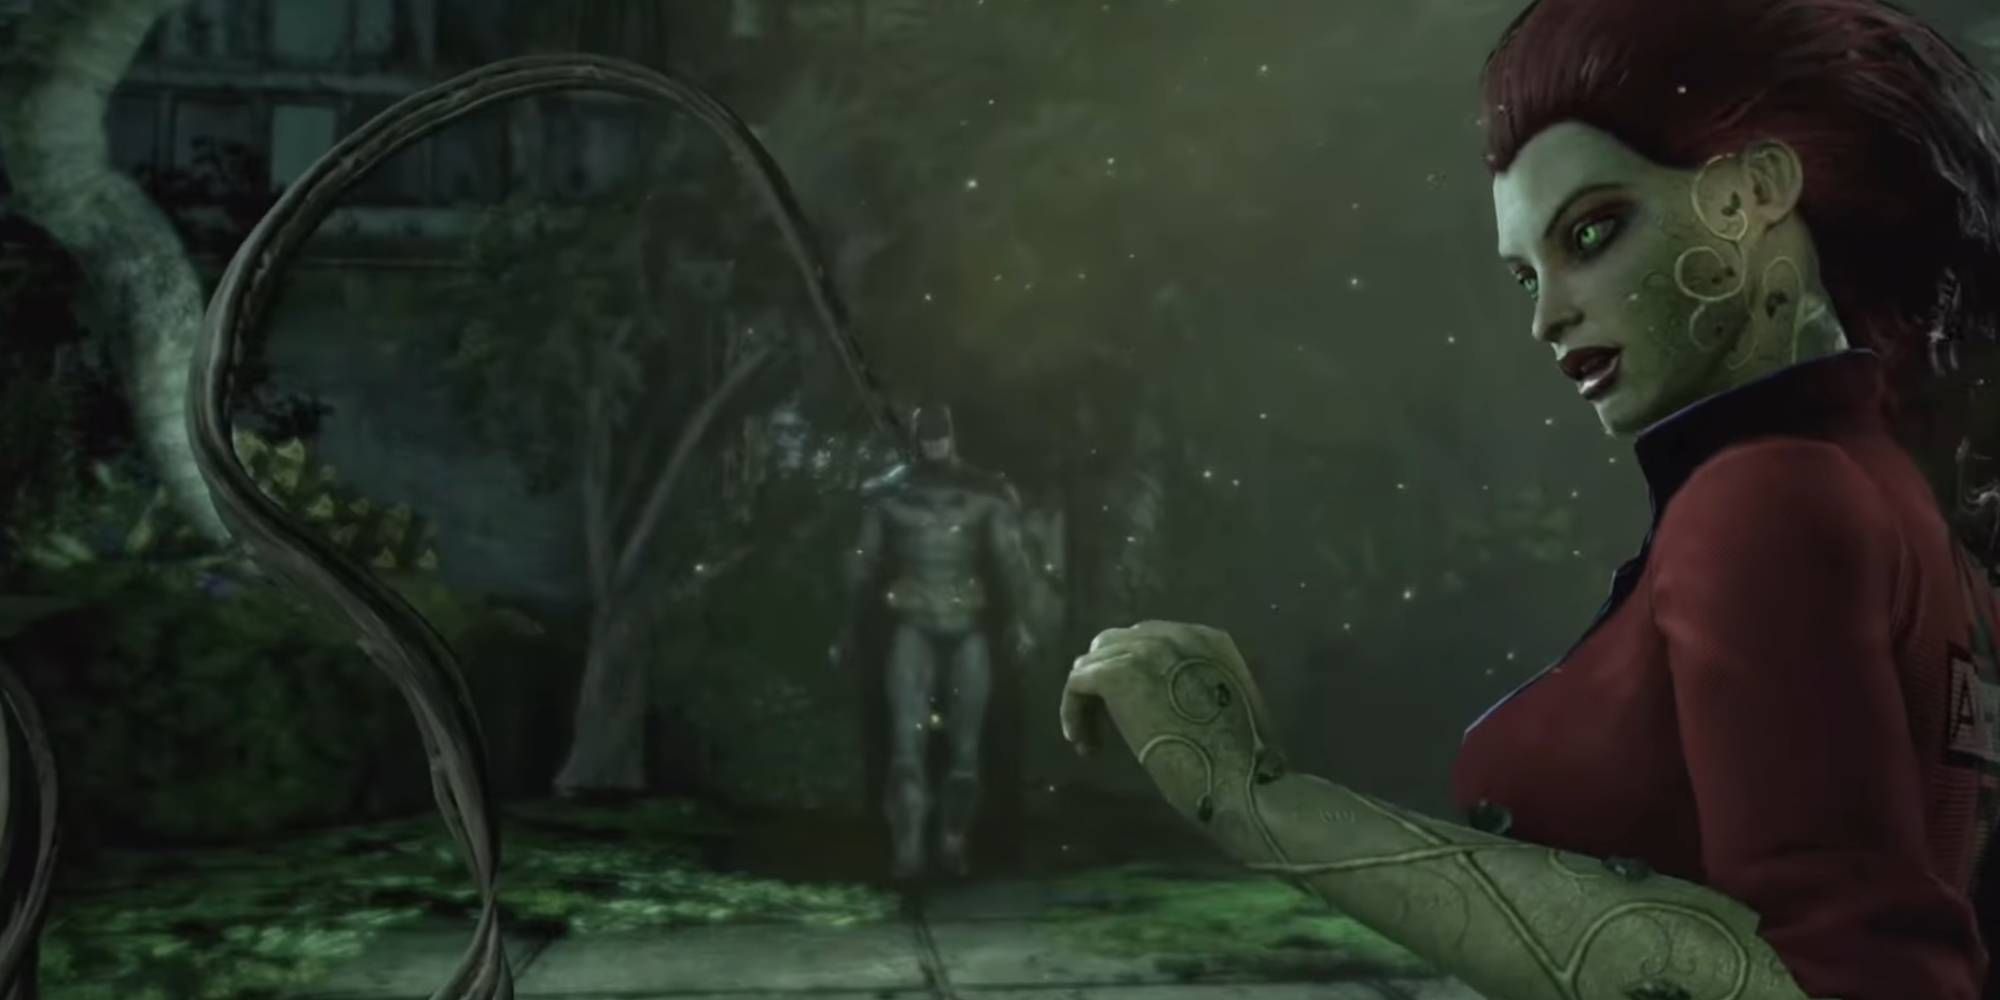 Poison Ivy to the right of the image, and Batman in the center. Ivy is wielding her plant powers